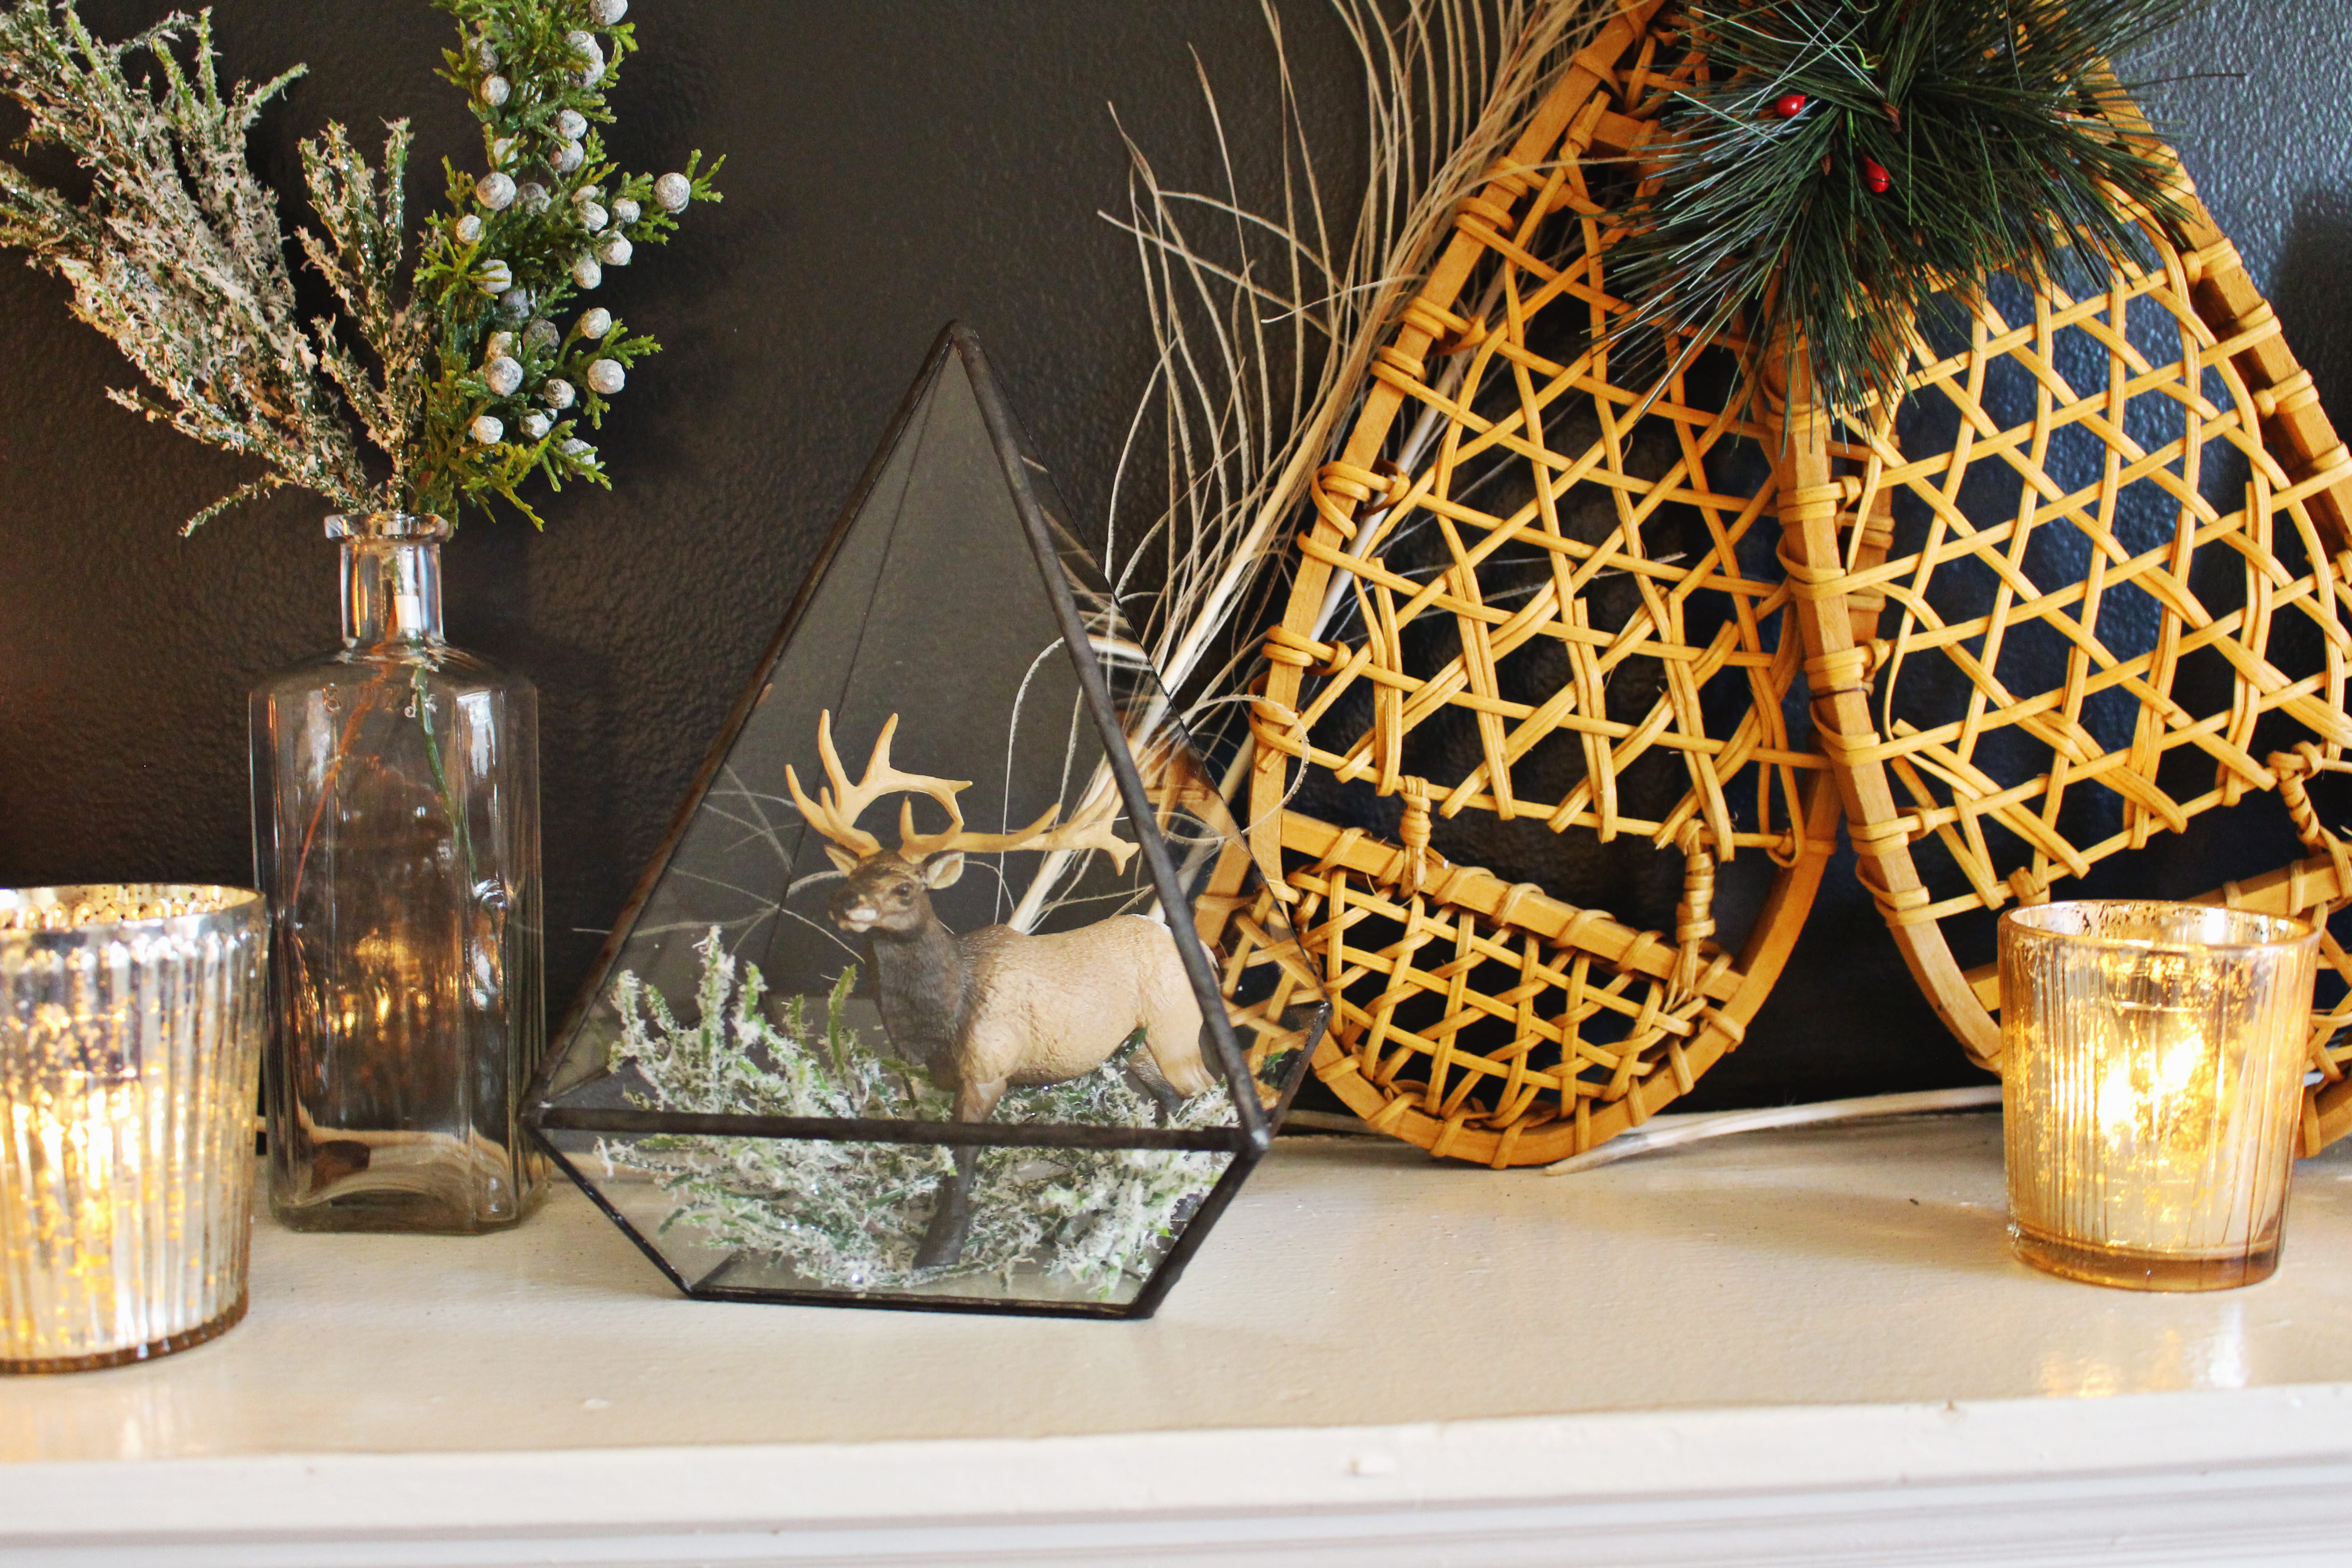 Place a toy moose with some greenery in a little glass prism for chic, woodsy mantel decor